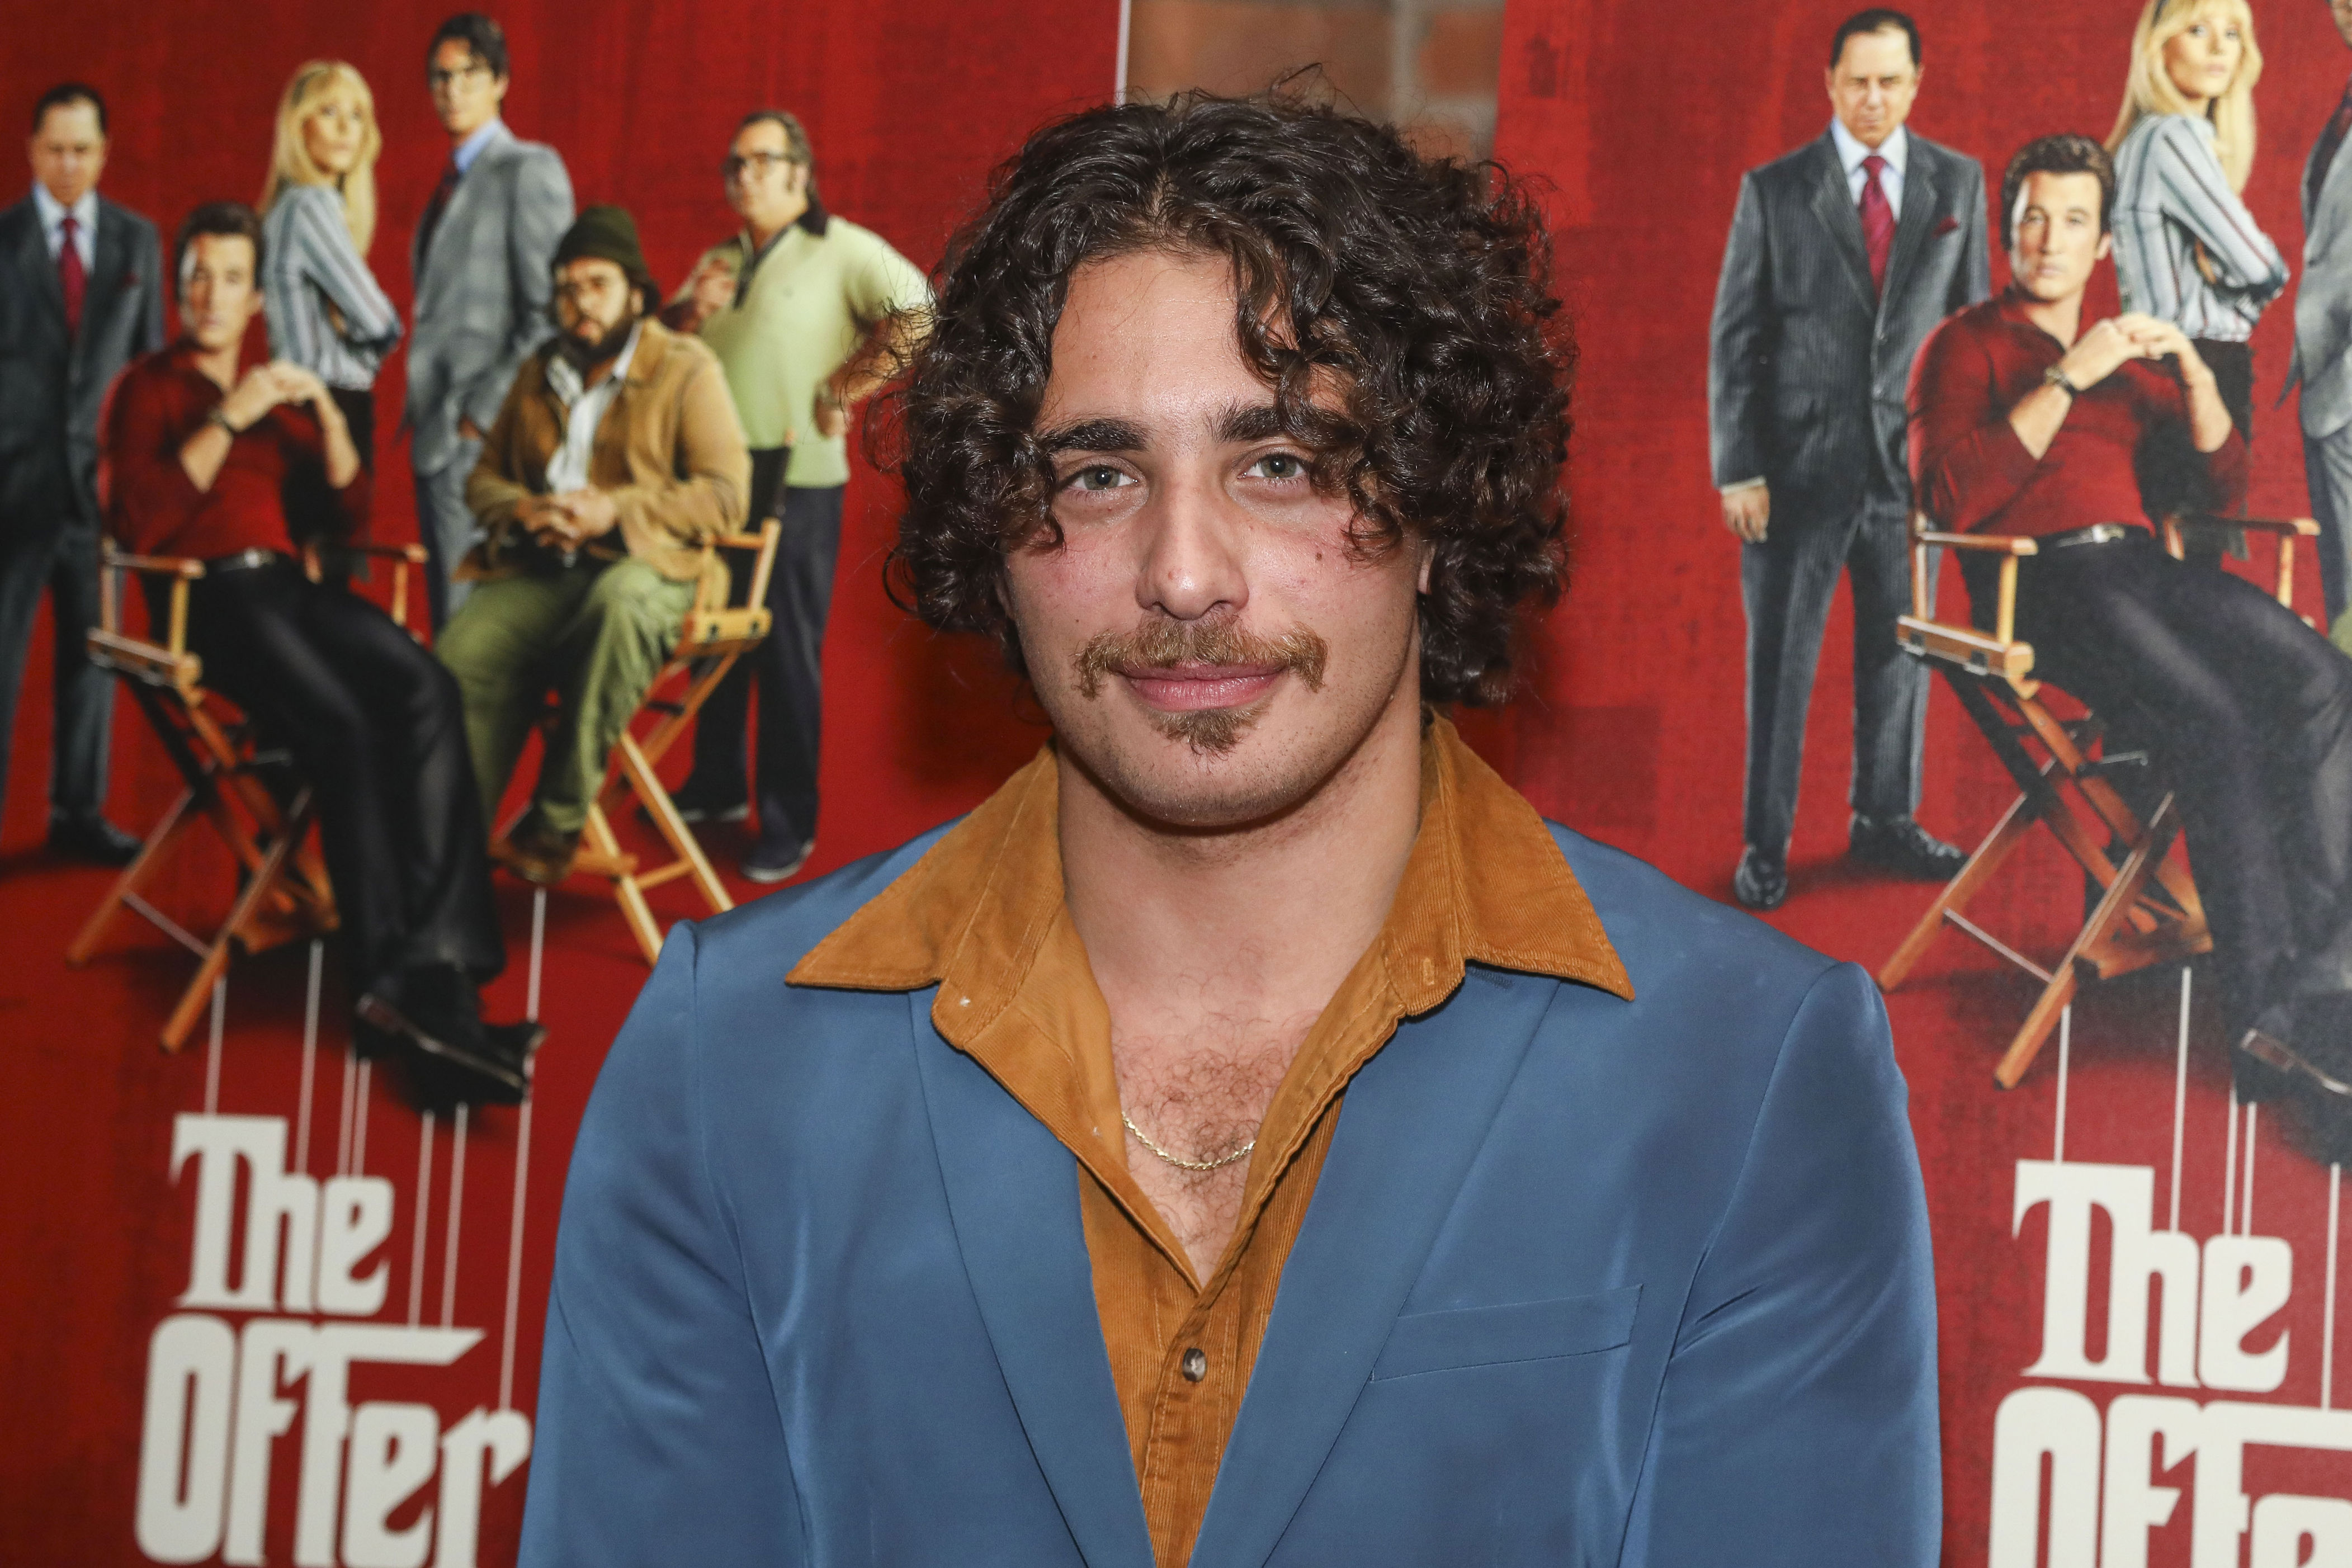 <p>Jake Cannavale (who was born in 1995) is now a musician and actor who's appeared on Broadway and on television in shows including "Nurse Jackie," "The Mandalorian" and the miniseries "The Offer." He's seen here at a screening of "The Offer" on April 24, 2022.</p>